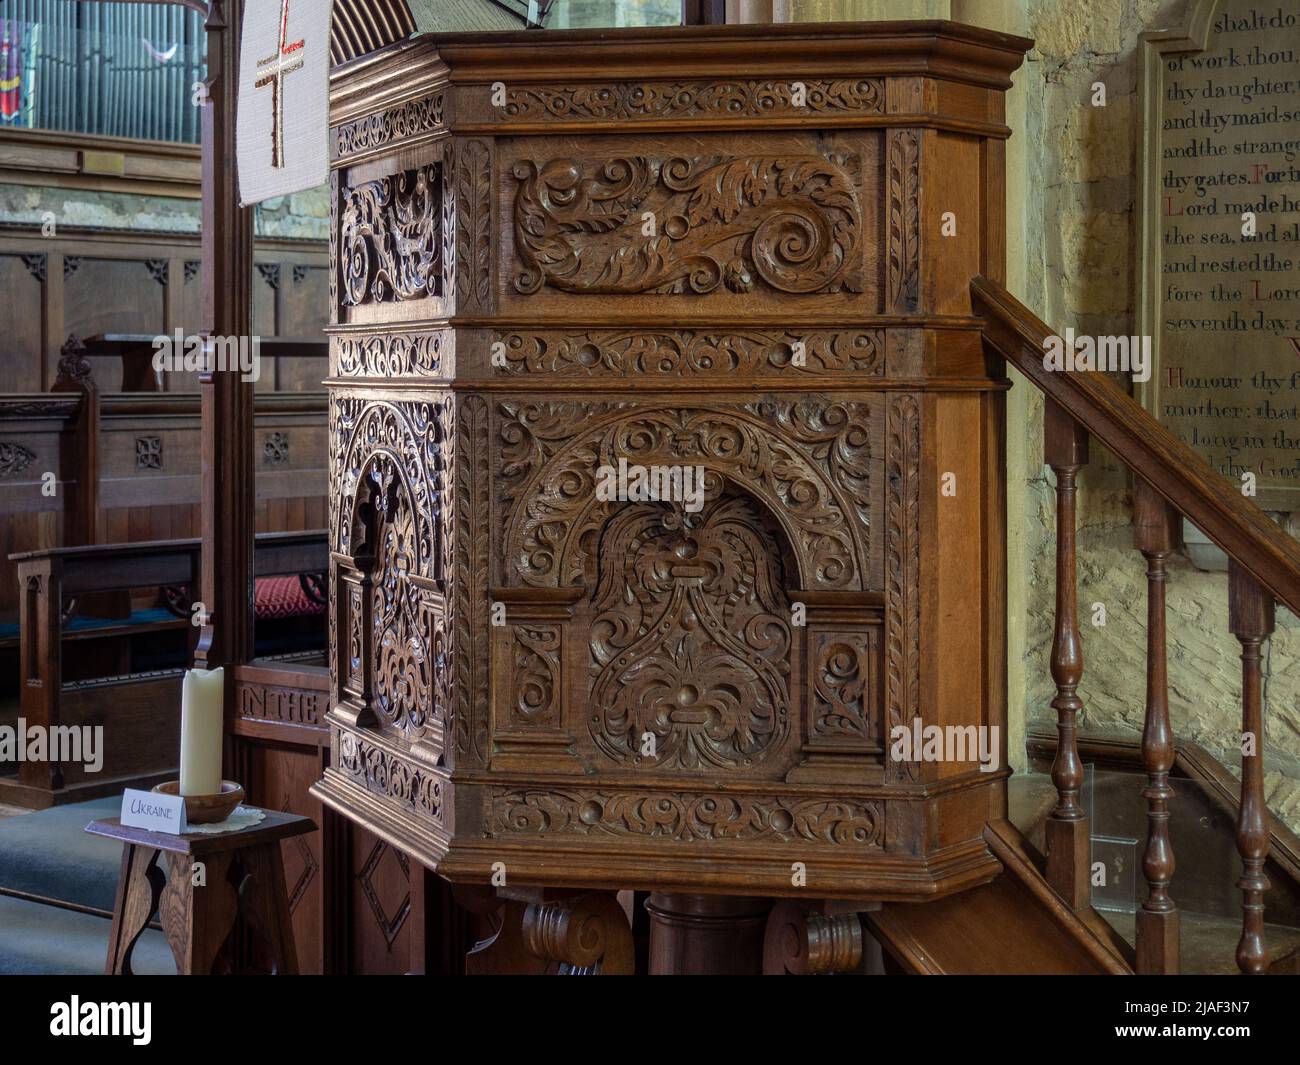 Carved wooden pulpit, interior of the parish church of St Michael and All Angels in the town of Broadway, Cotswolds, Worcestershire, UK Stock Photo